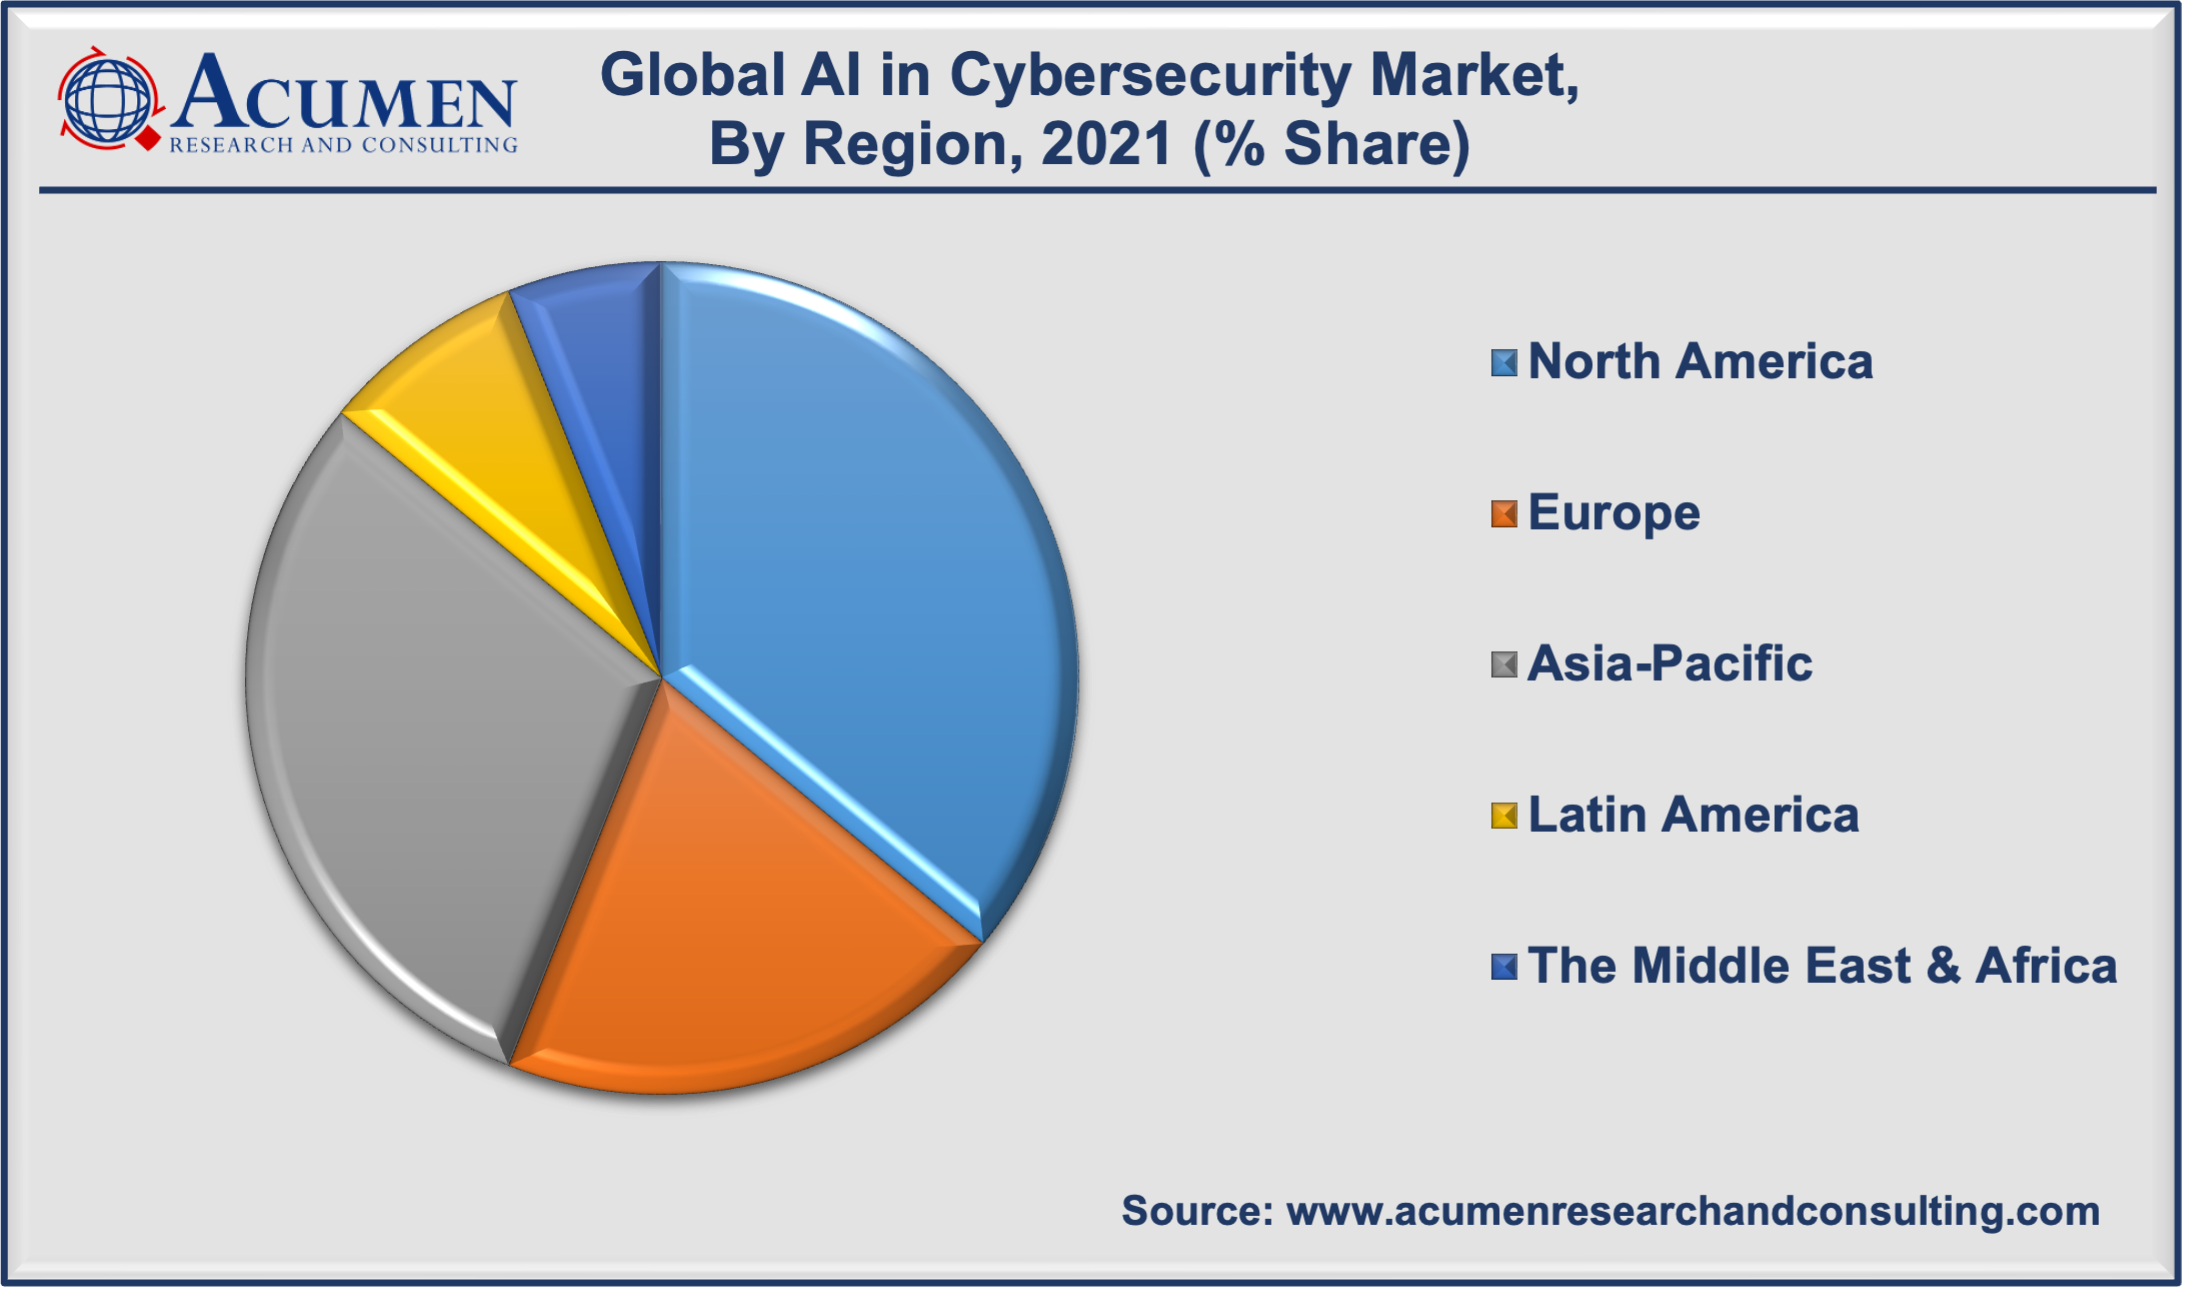 Artificial Intelligence (AI) in Cybersecurity Market Analysis accounted for USD 14.9 Billion in 2021 and is estimated to reach the market value of USD 133.8 Billion by 2030.